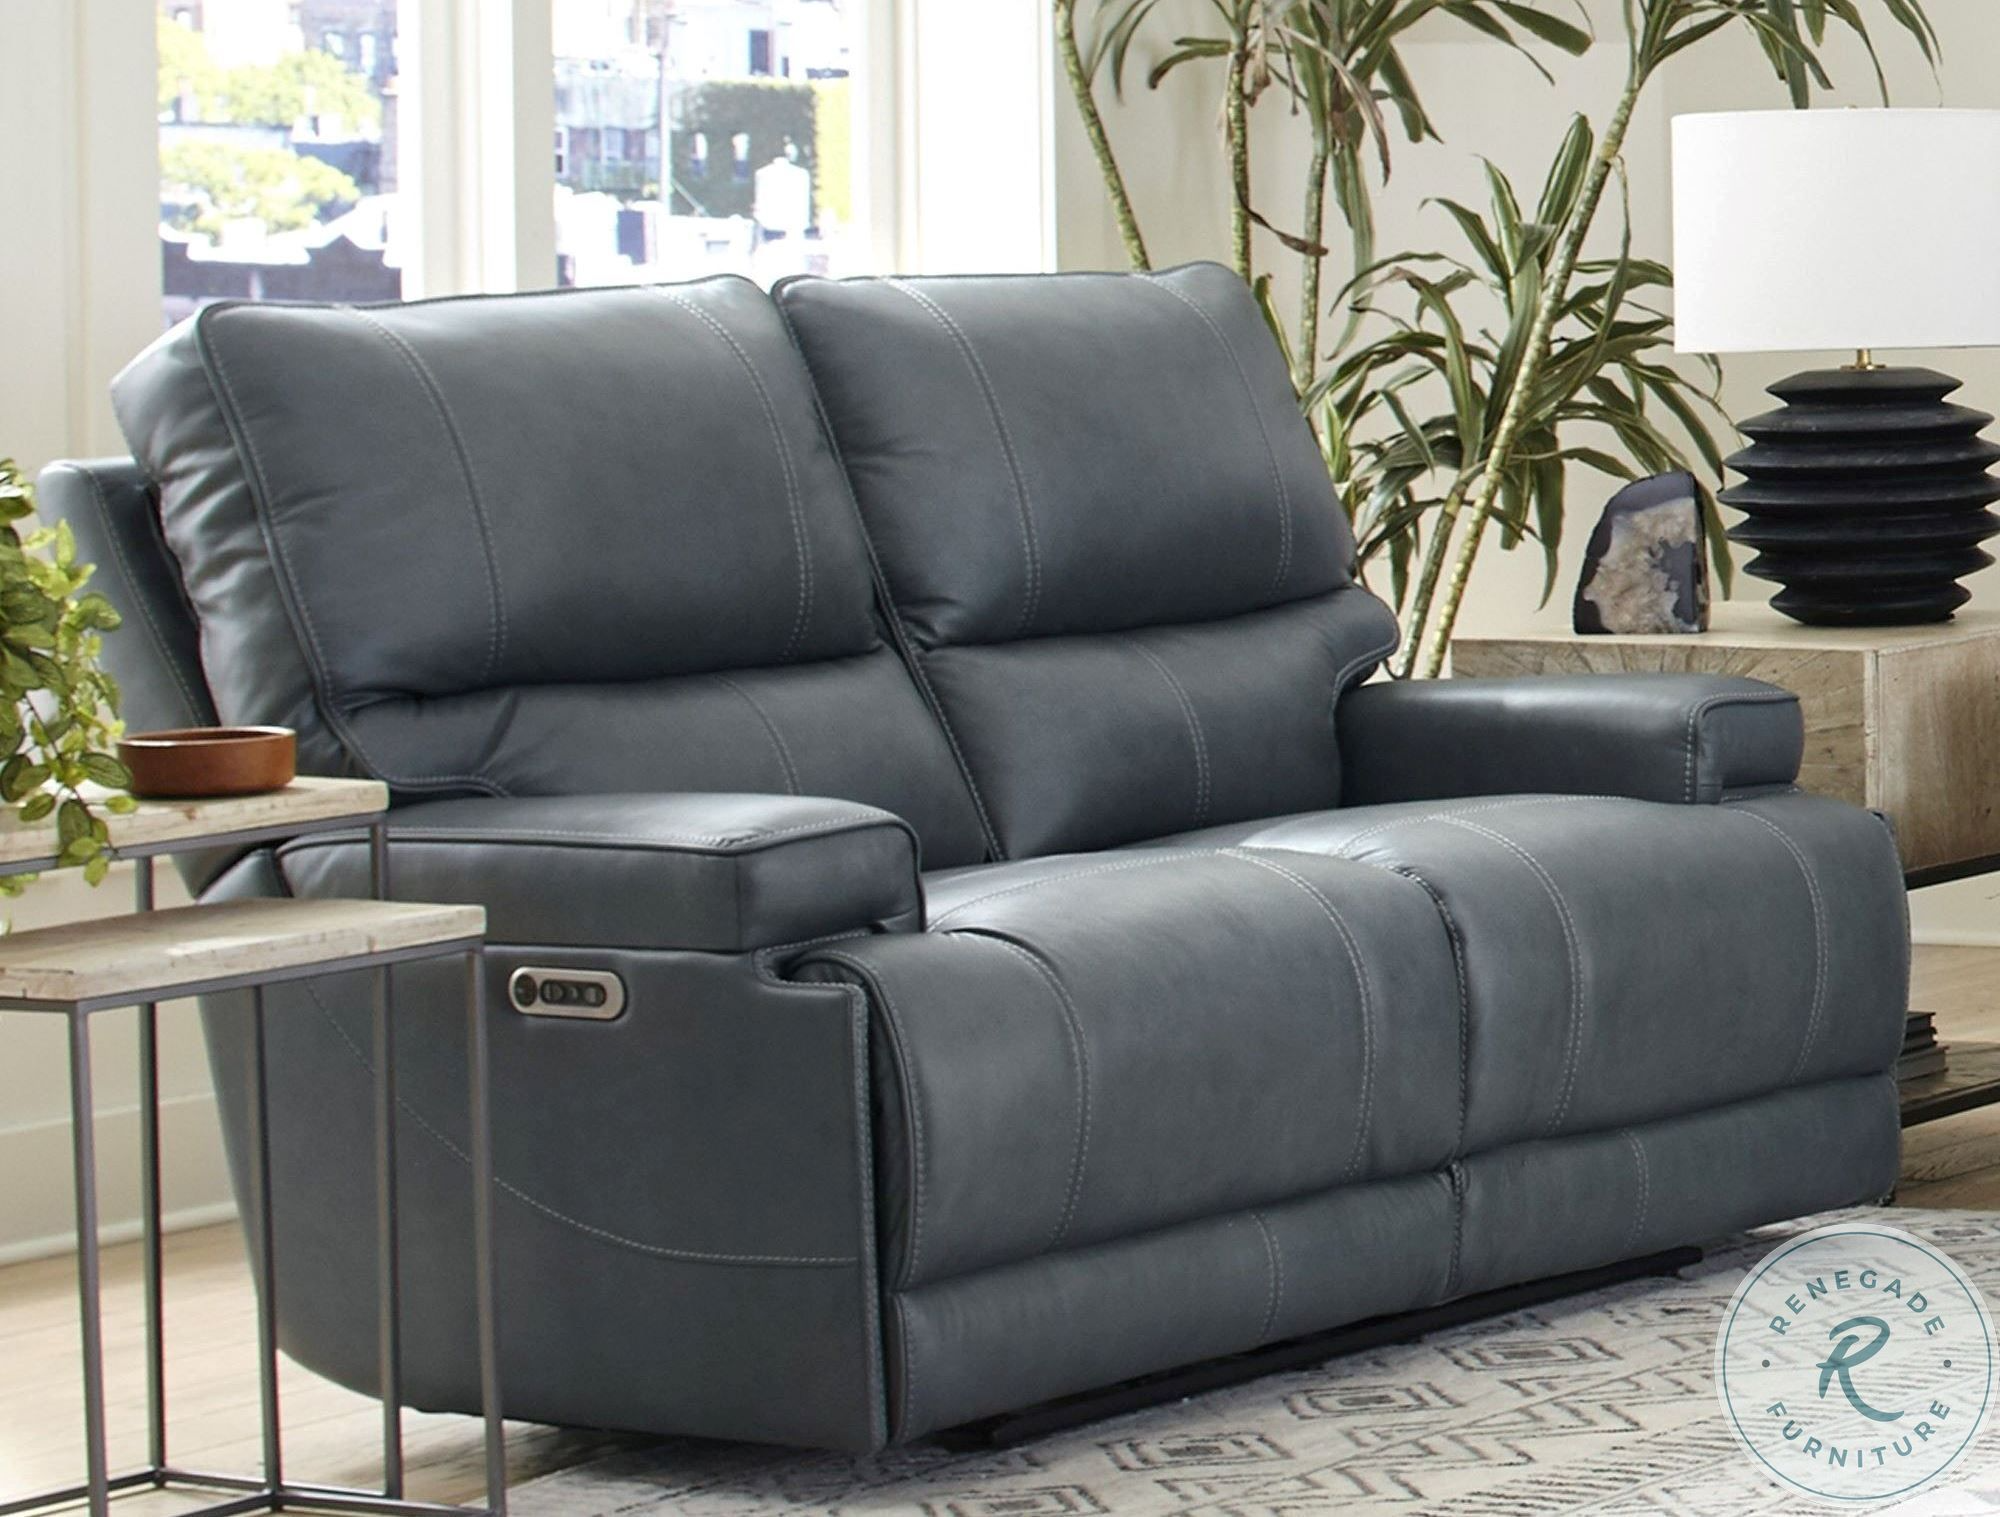 Make power loveseat a selection for your
home sofa set